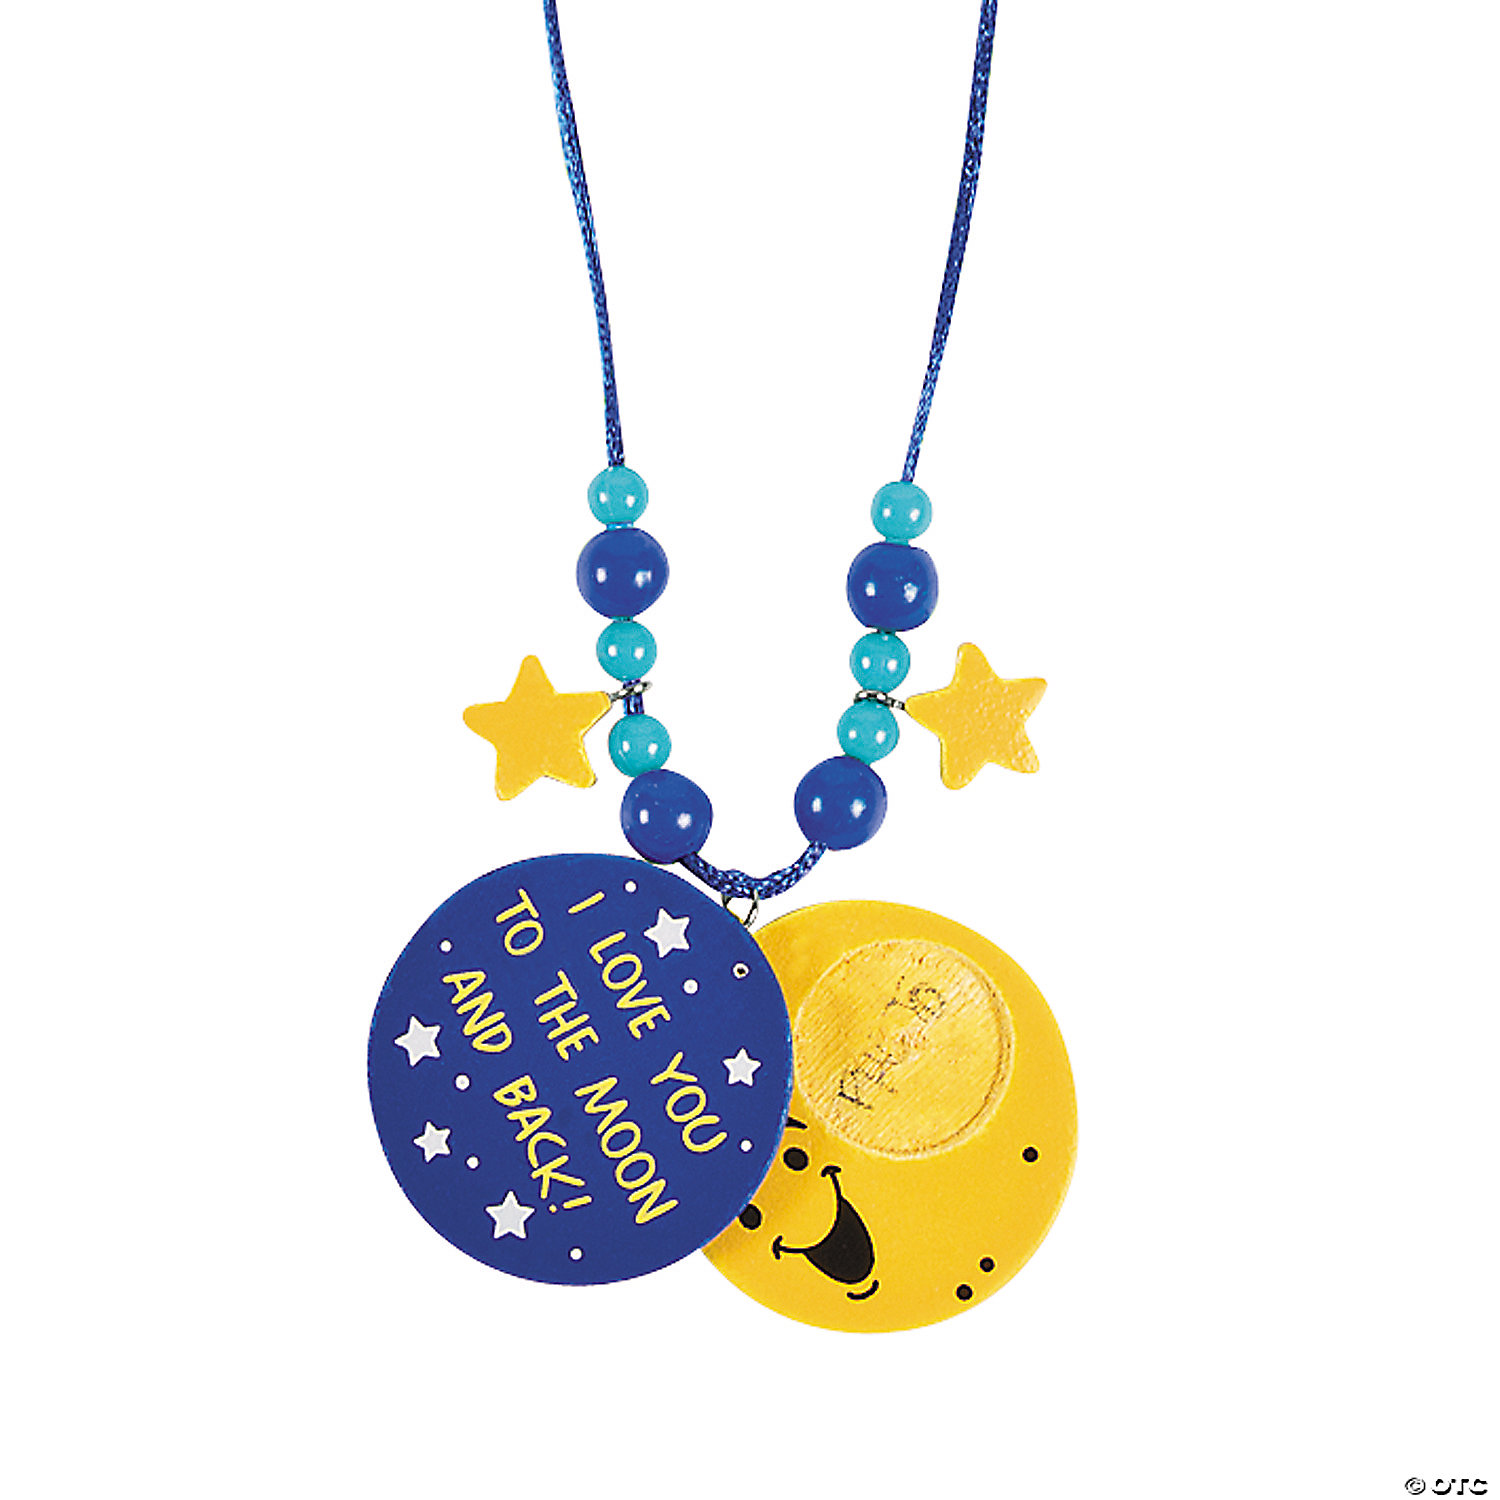 I Love You To The Moon And Back Necklace Craft Kit Discontinued